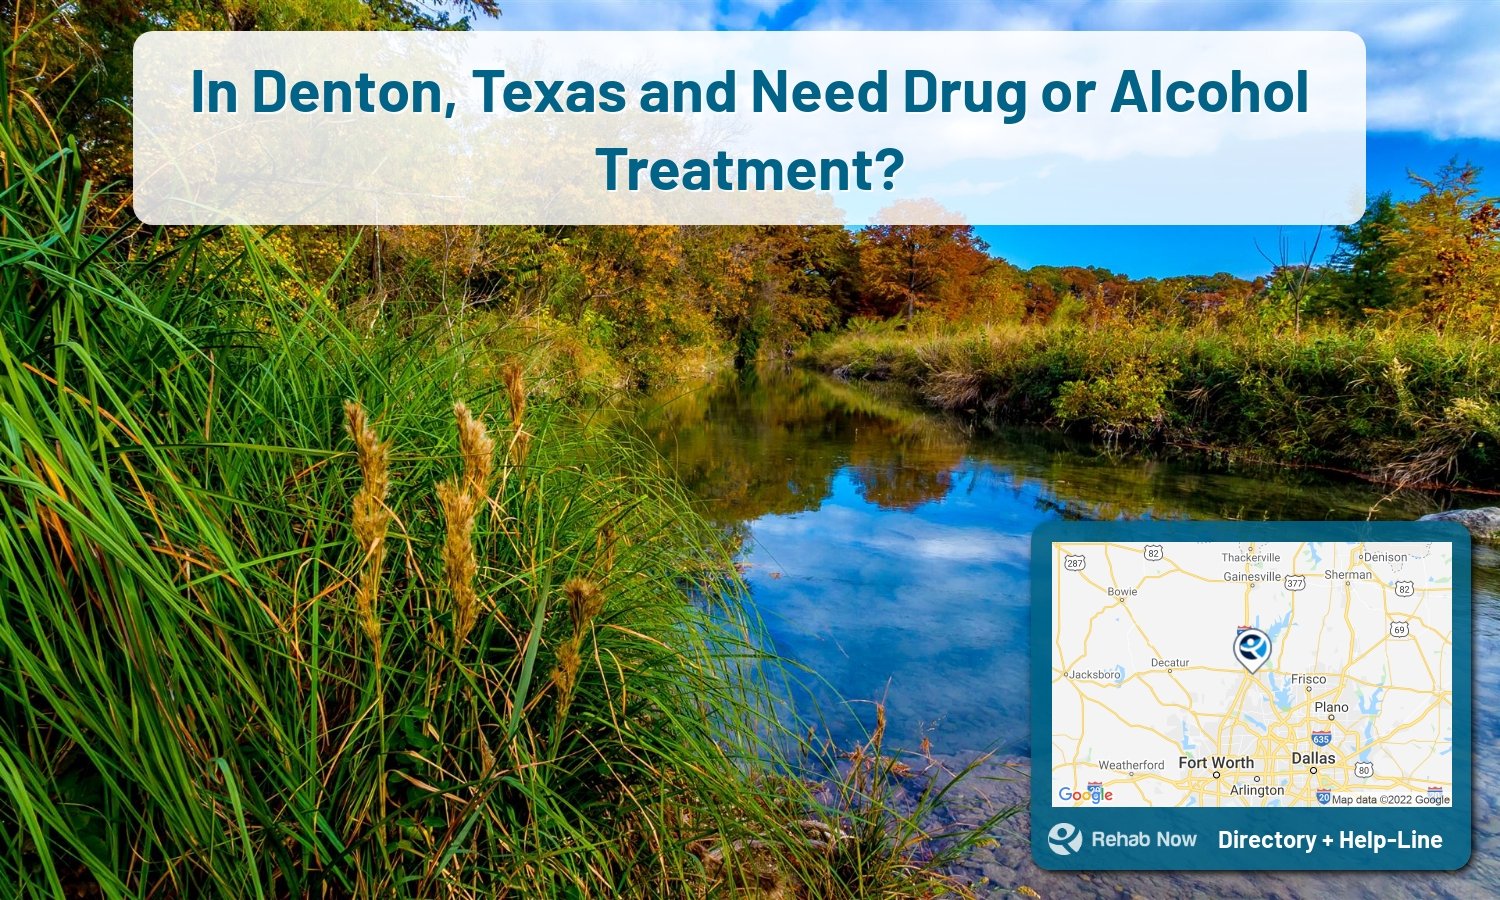 Find drug rehab and alcohol treatment services in Taft. Our experts help you find a center in Taft, California